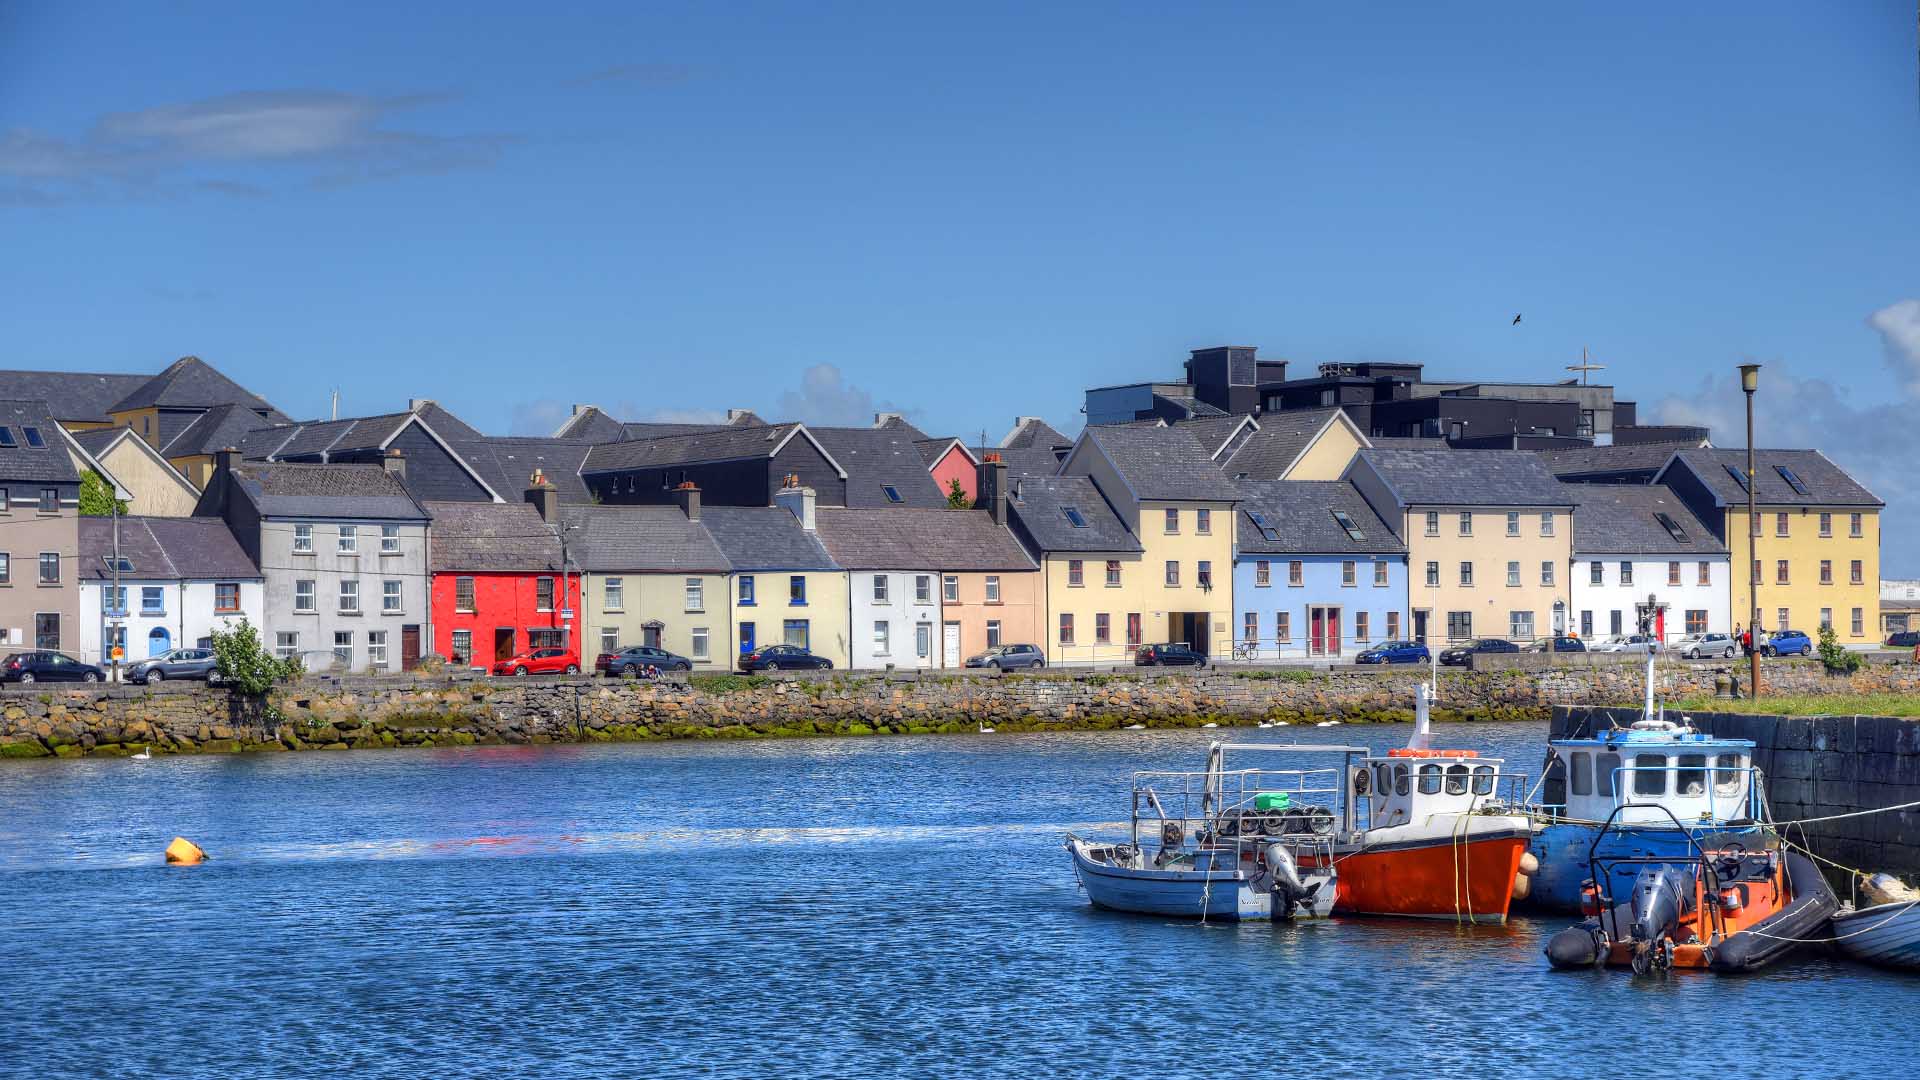 The Claddagh Galway in Ireland